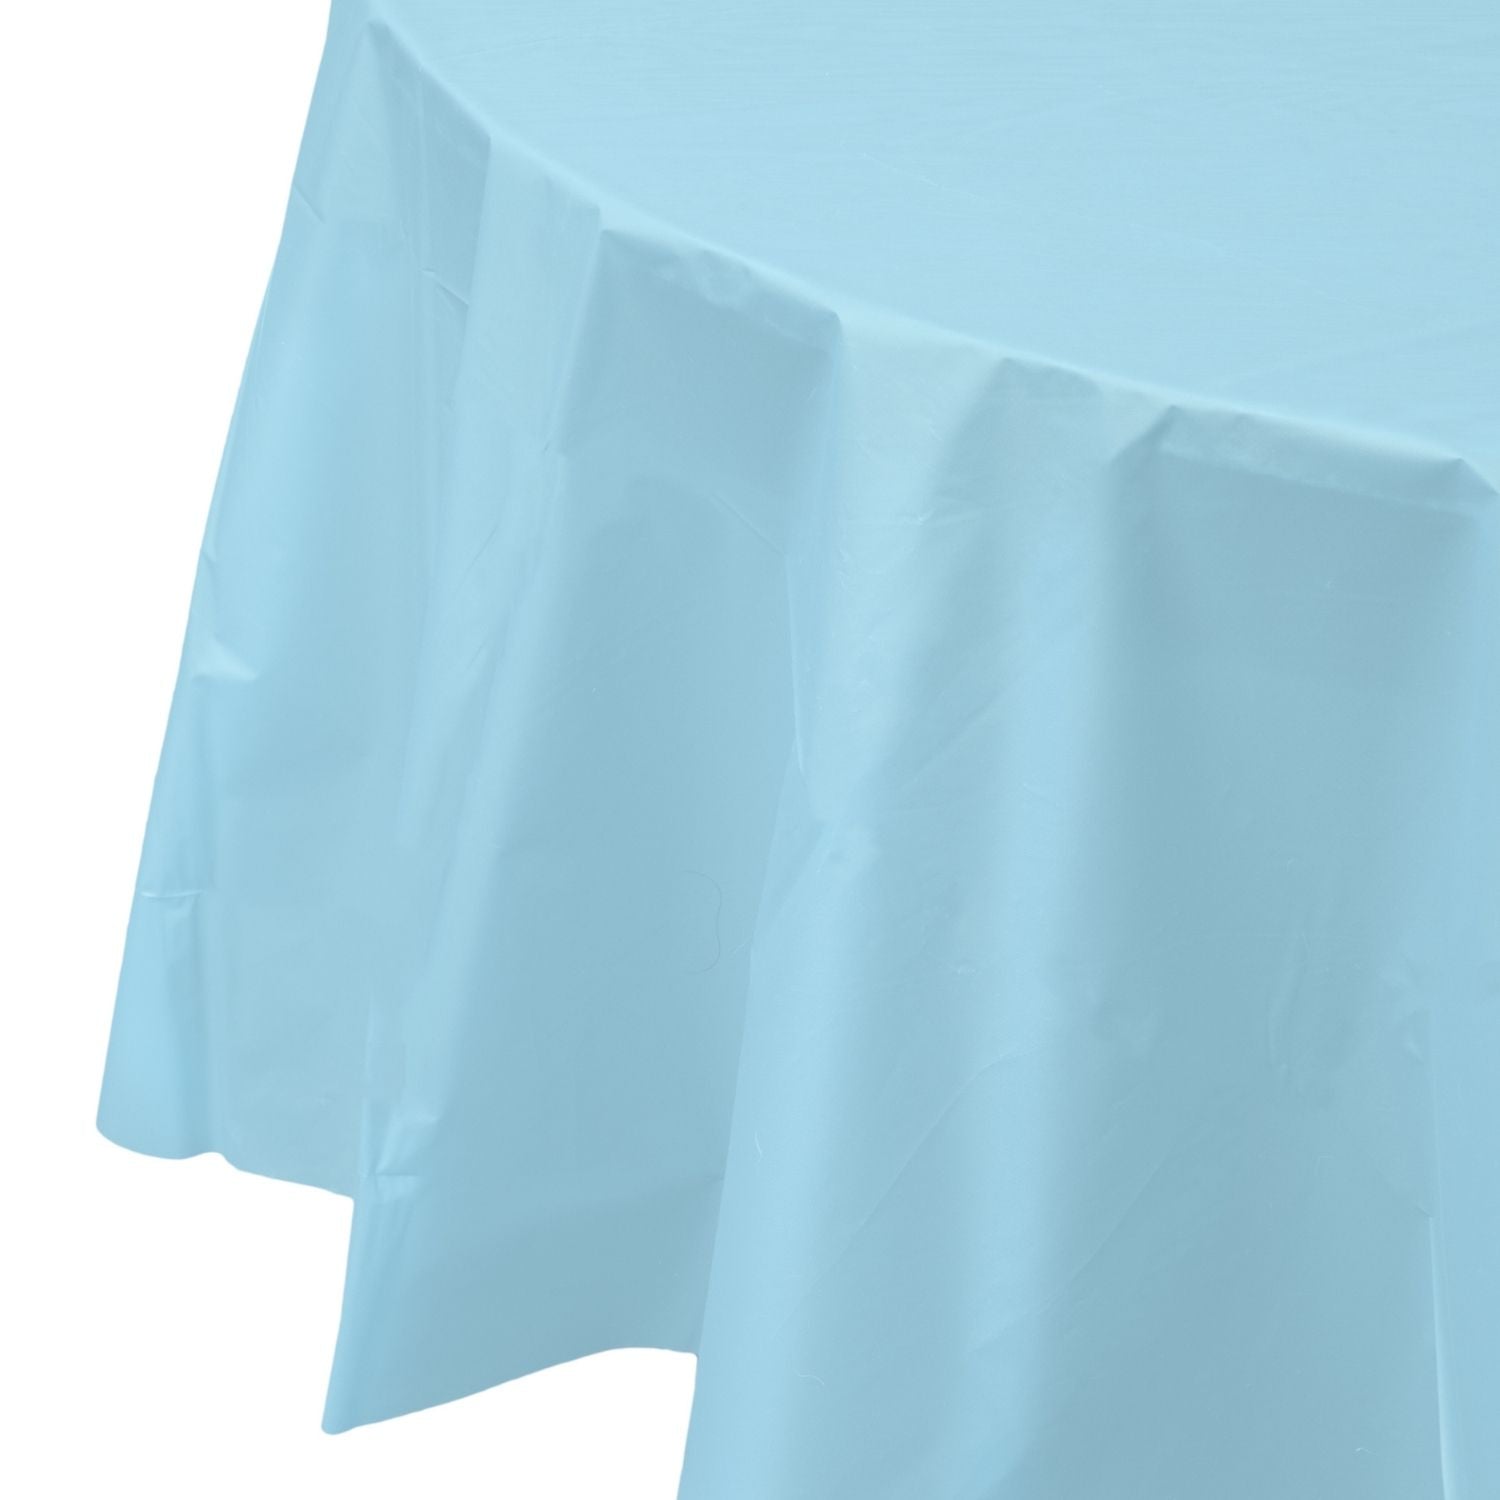 Light Blue Round Plastic Tablecloth | 48 Count - Yom Tov Settings